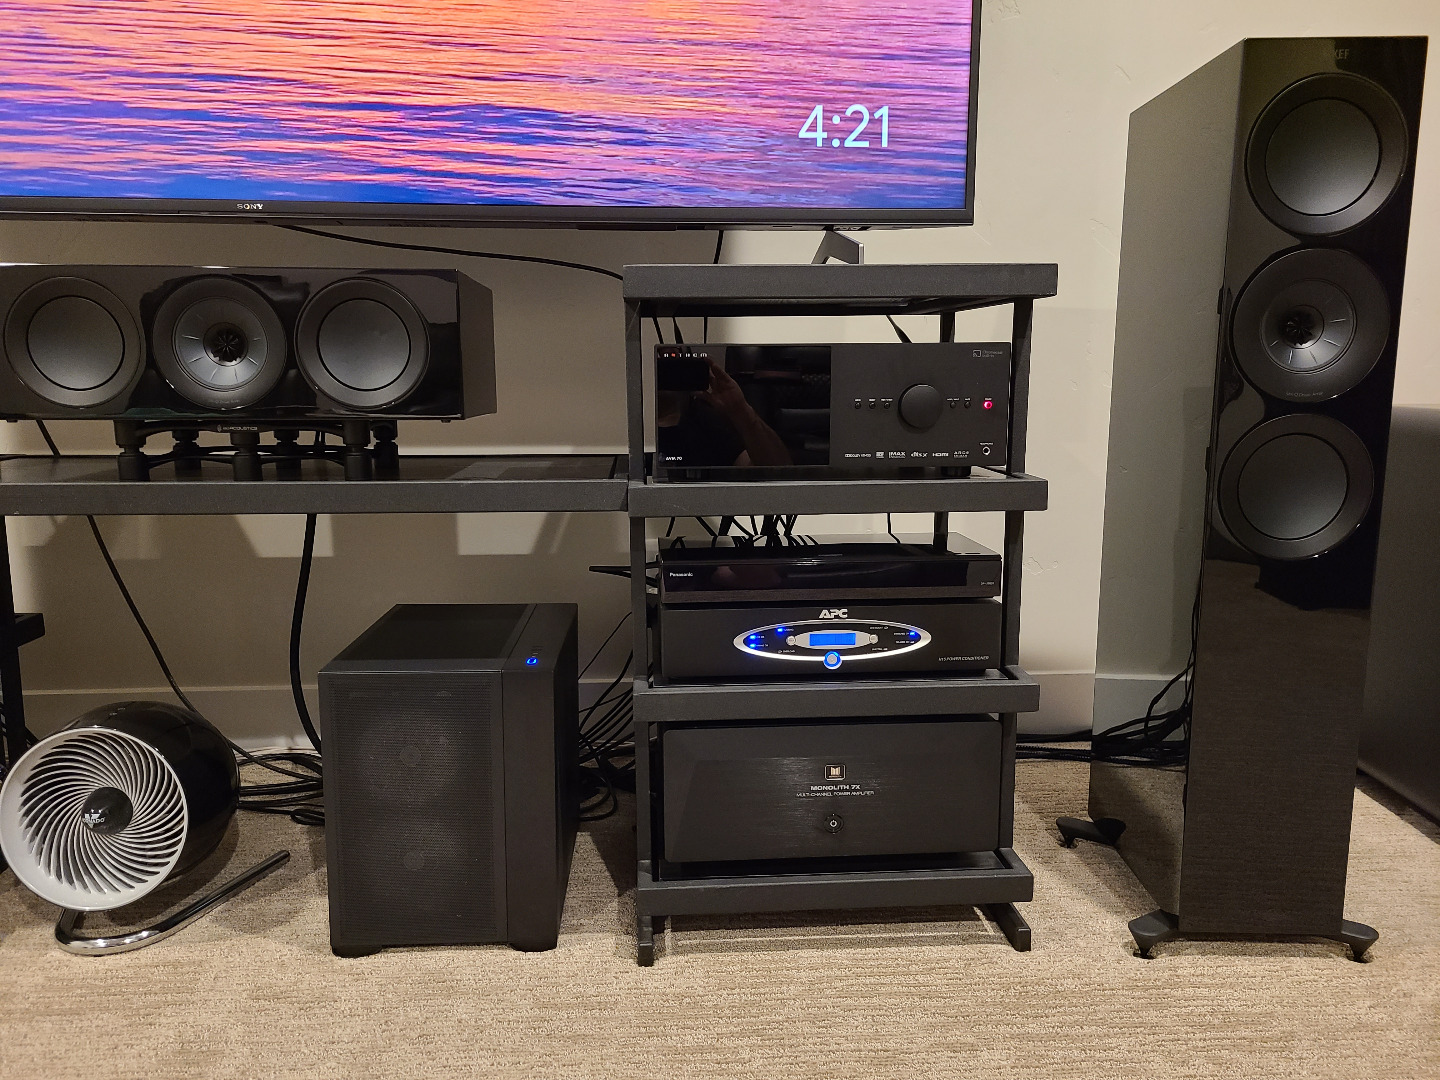 Review] isoACOUSTICS Aperta - Speaker Stands